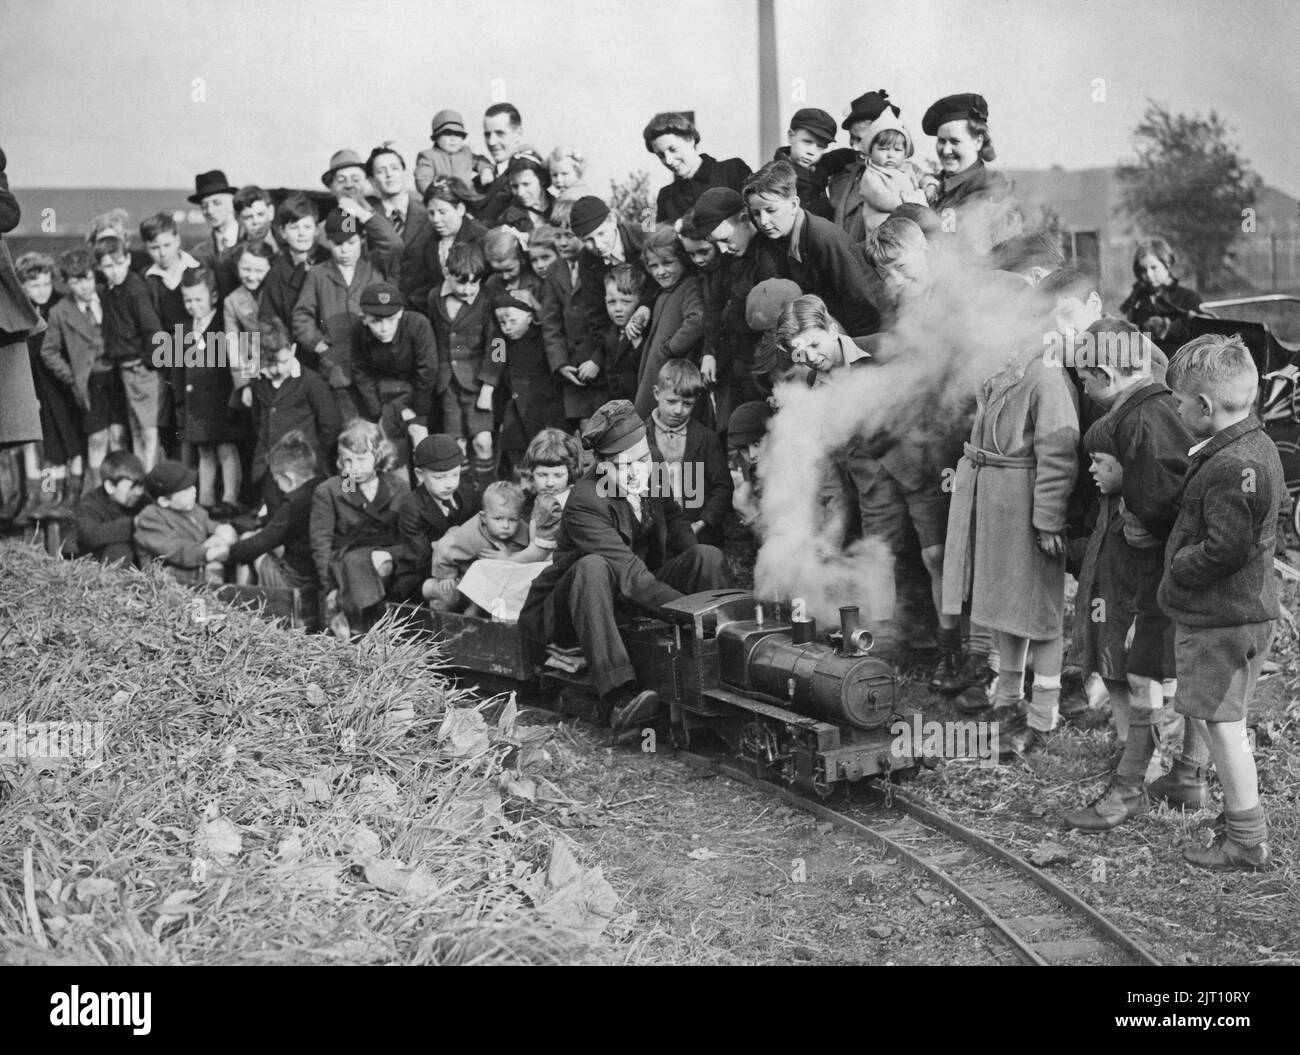 Miniature train. Englishman Jim Haughton has built his own miniature railway and steam locomotive in his garden i the villa Stockport outside Chshire. The picture shows him operating it with children riding in the railway cars behind him. 1944 Stock Photo